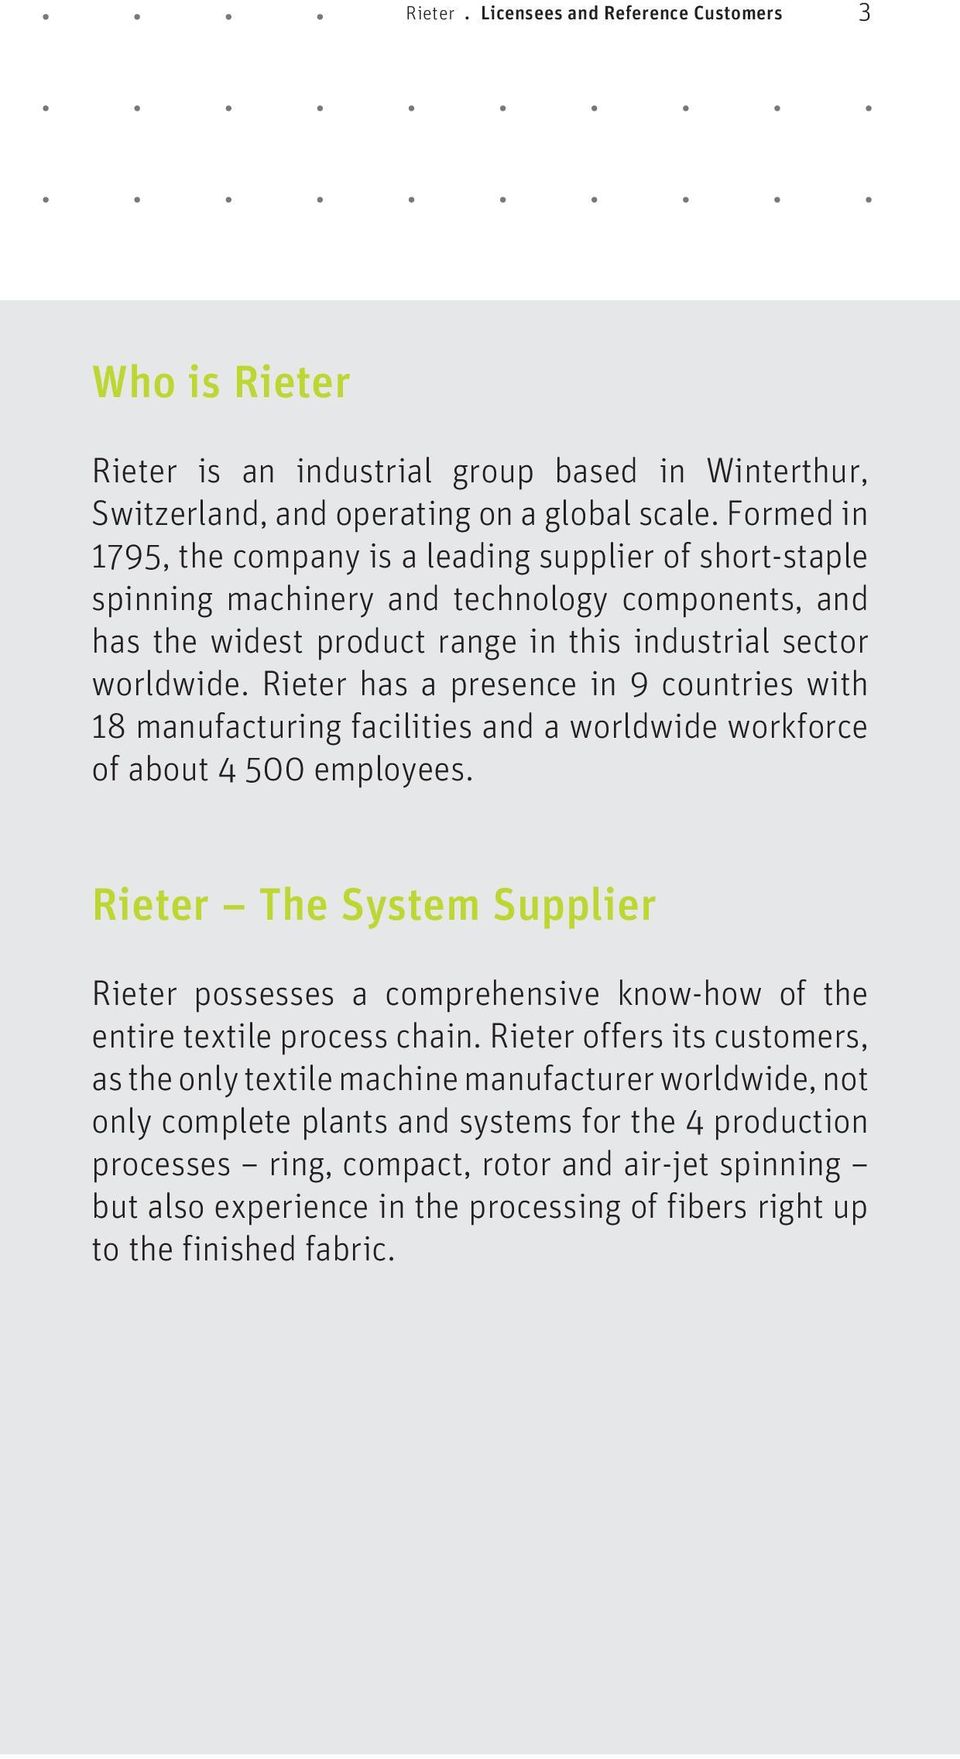 Rieter has a presence in 9 countries with 18 manufacturing facilities and a worldwide workforce of about 4 500 employees.